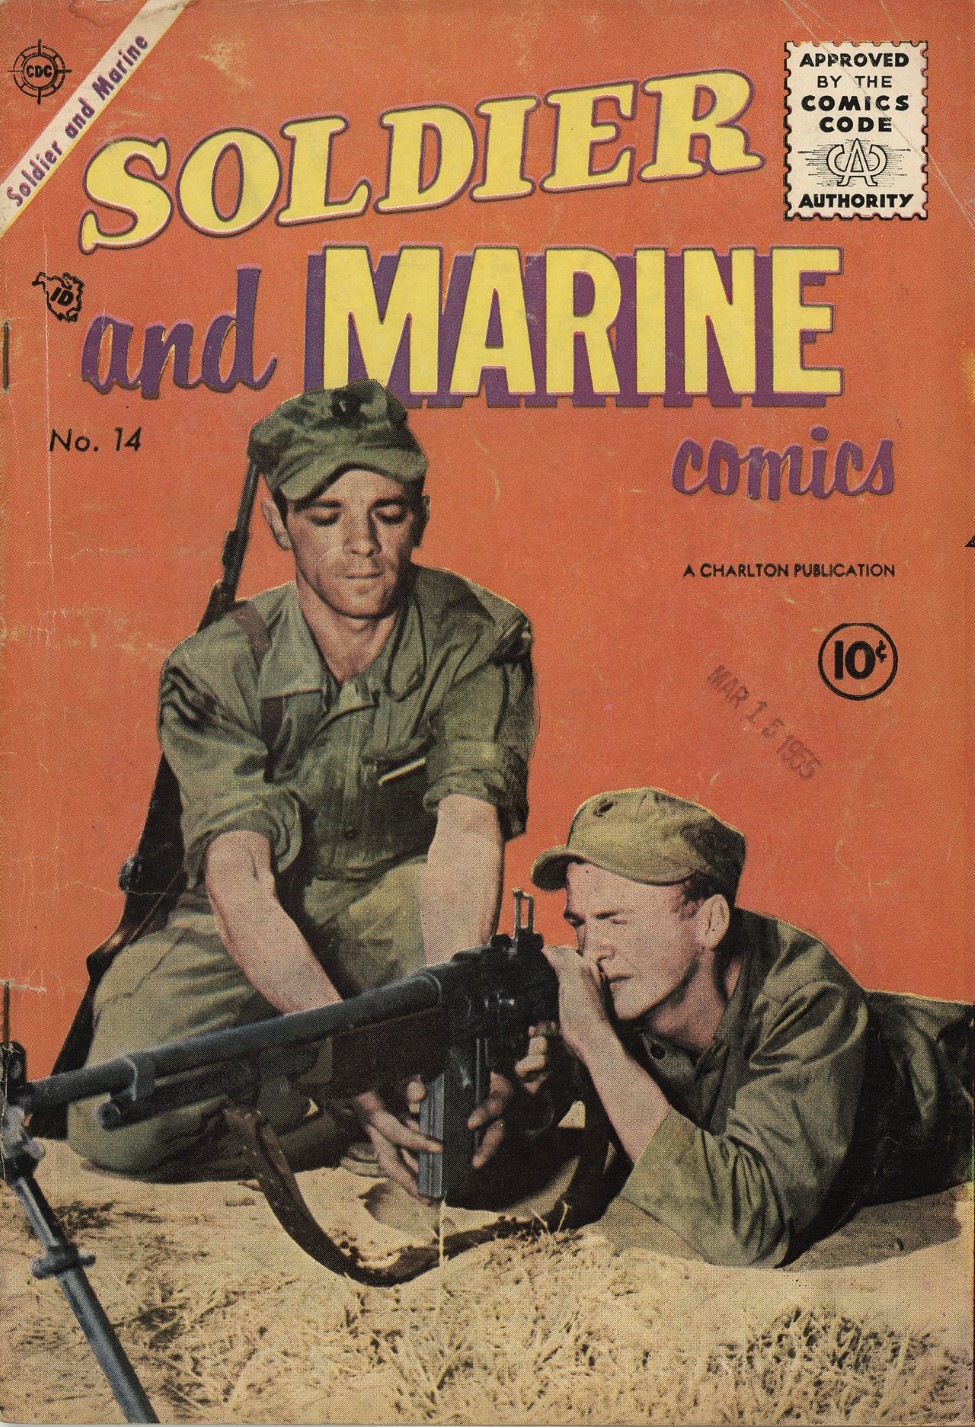 Book Cover For Soldier and Marine Comics 14 (alt) - Version 2